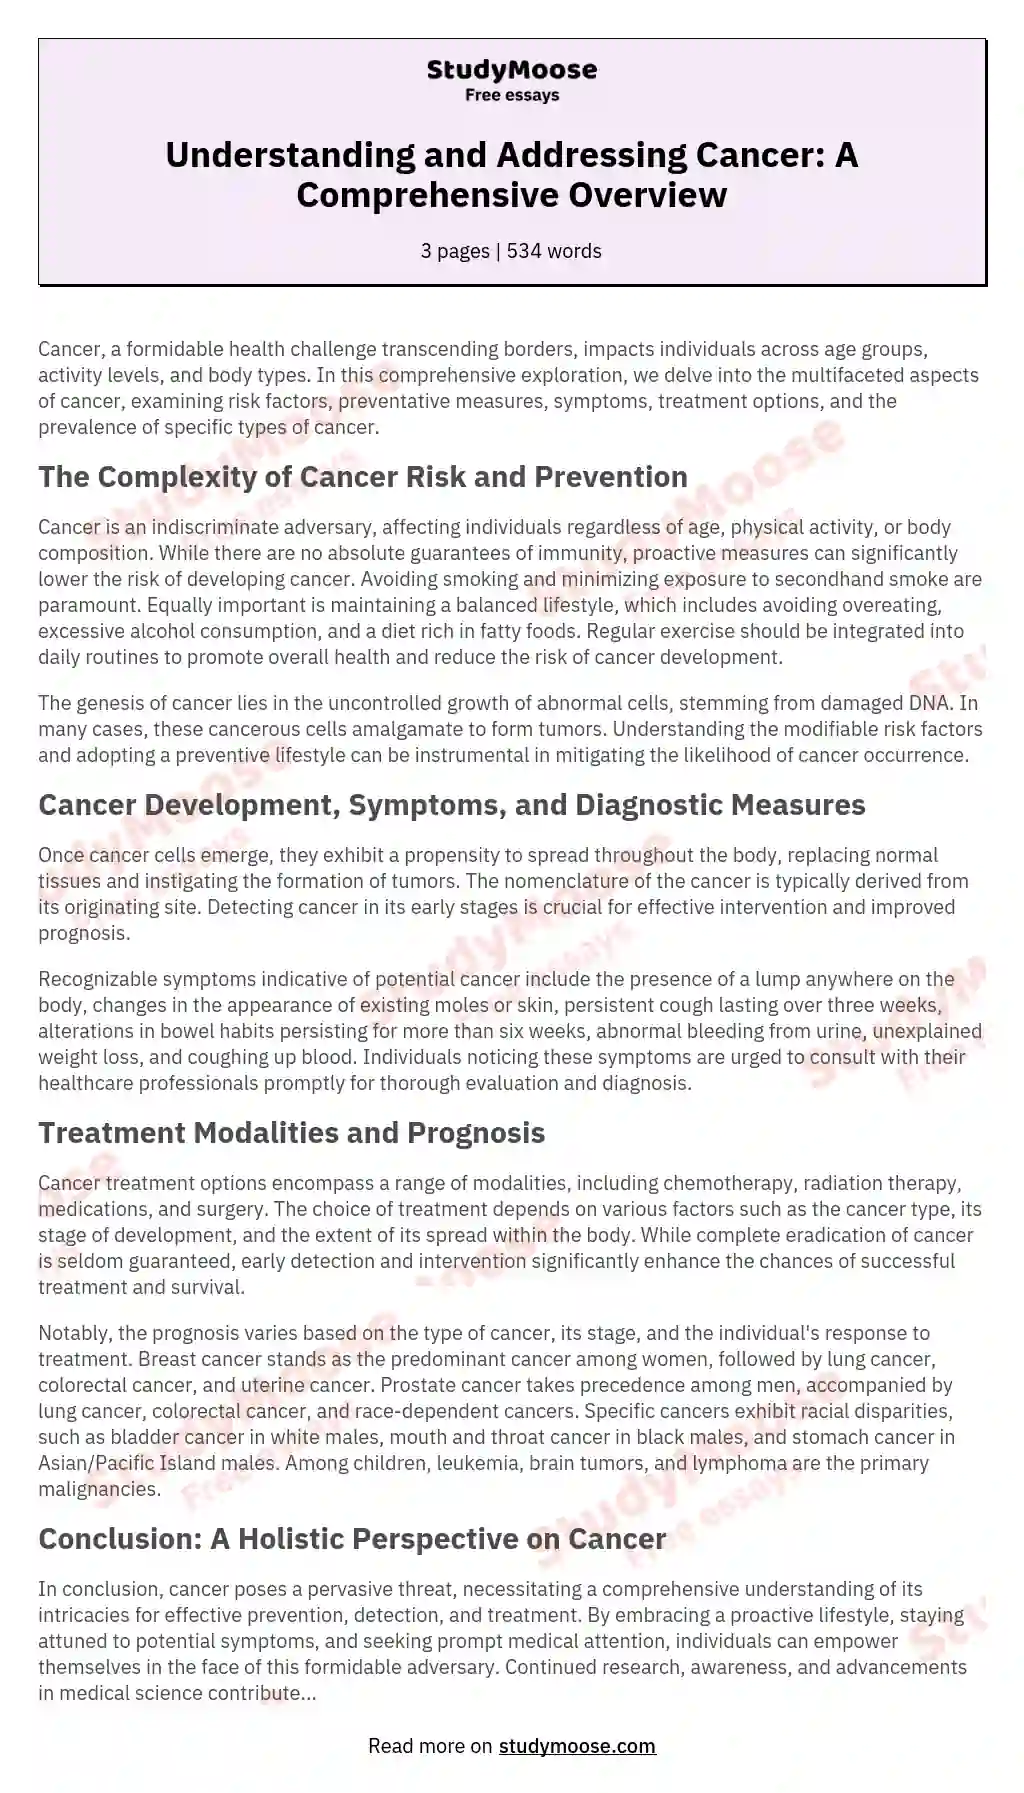 Understanding and Addressing Cancer: A Comprehensive Overview essay